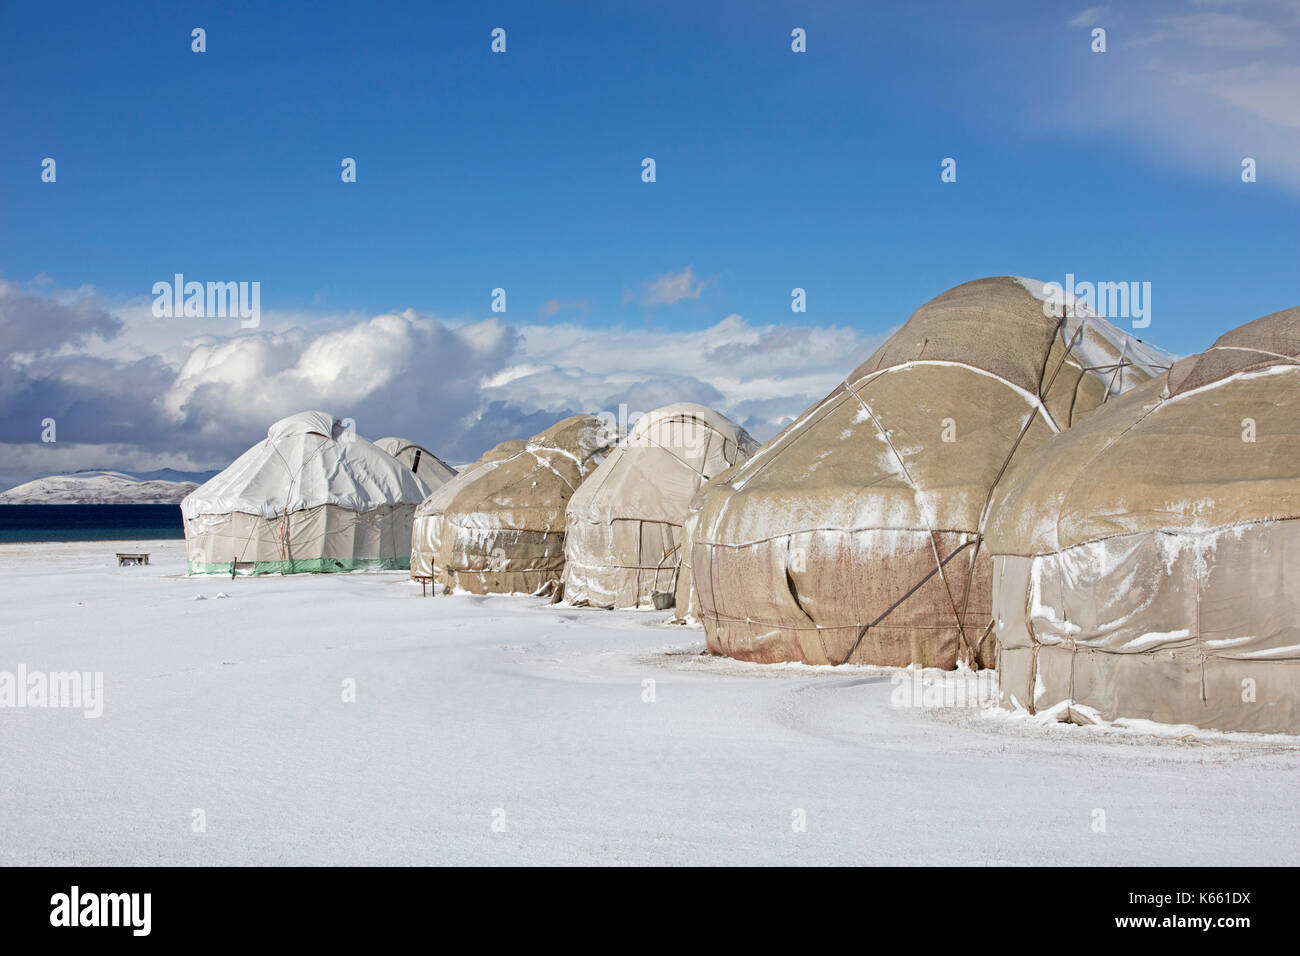 Yurts in traditional Kyrgyz yurt camp in the snow along Song Kul / Song Kol lake in the Tian Shan Mountains, Naryn Province, Kyrgyzstan Stock Photo